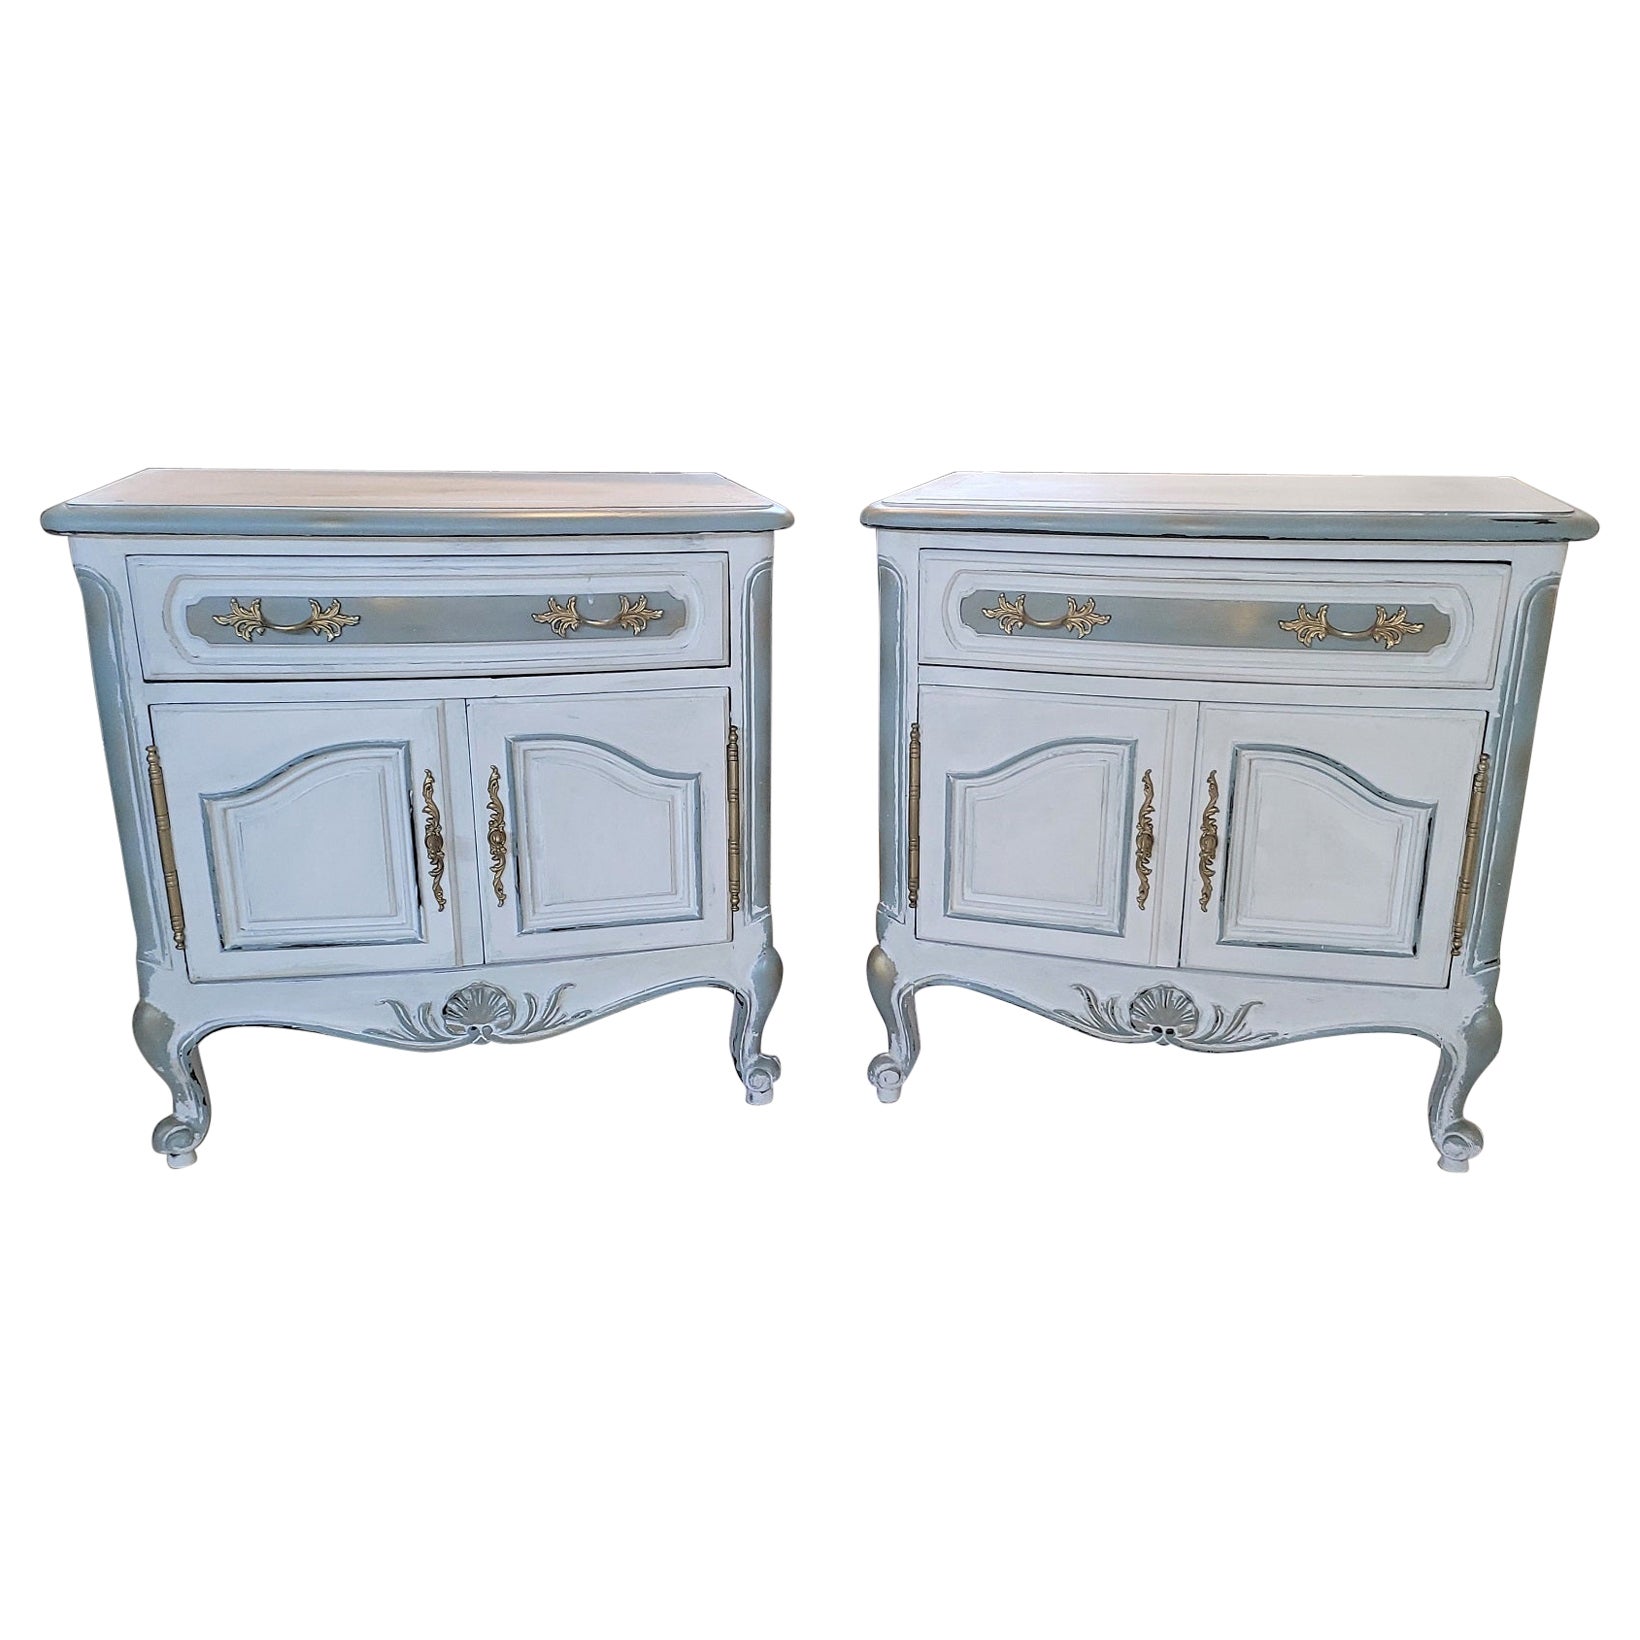 Pair of Painted French Country Nightstands